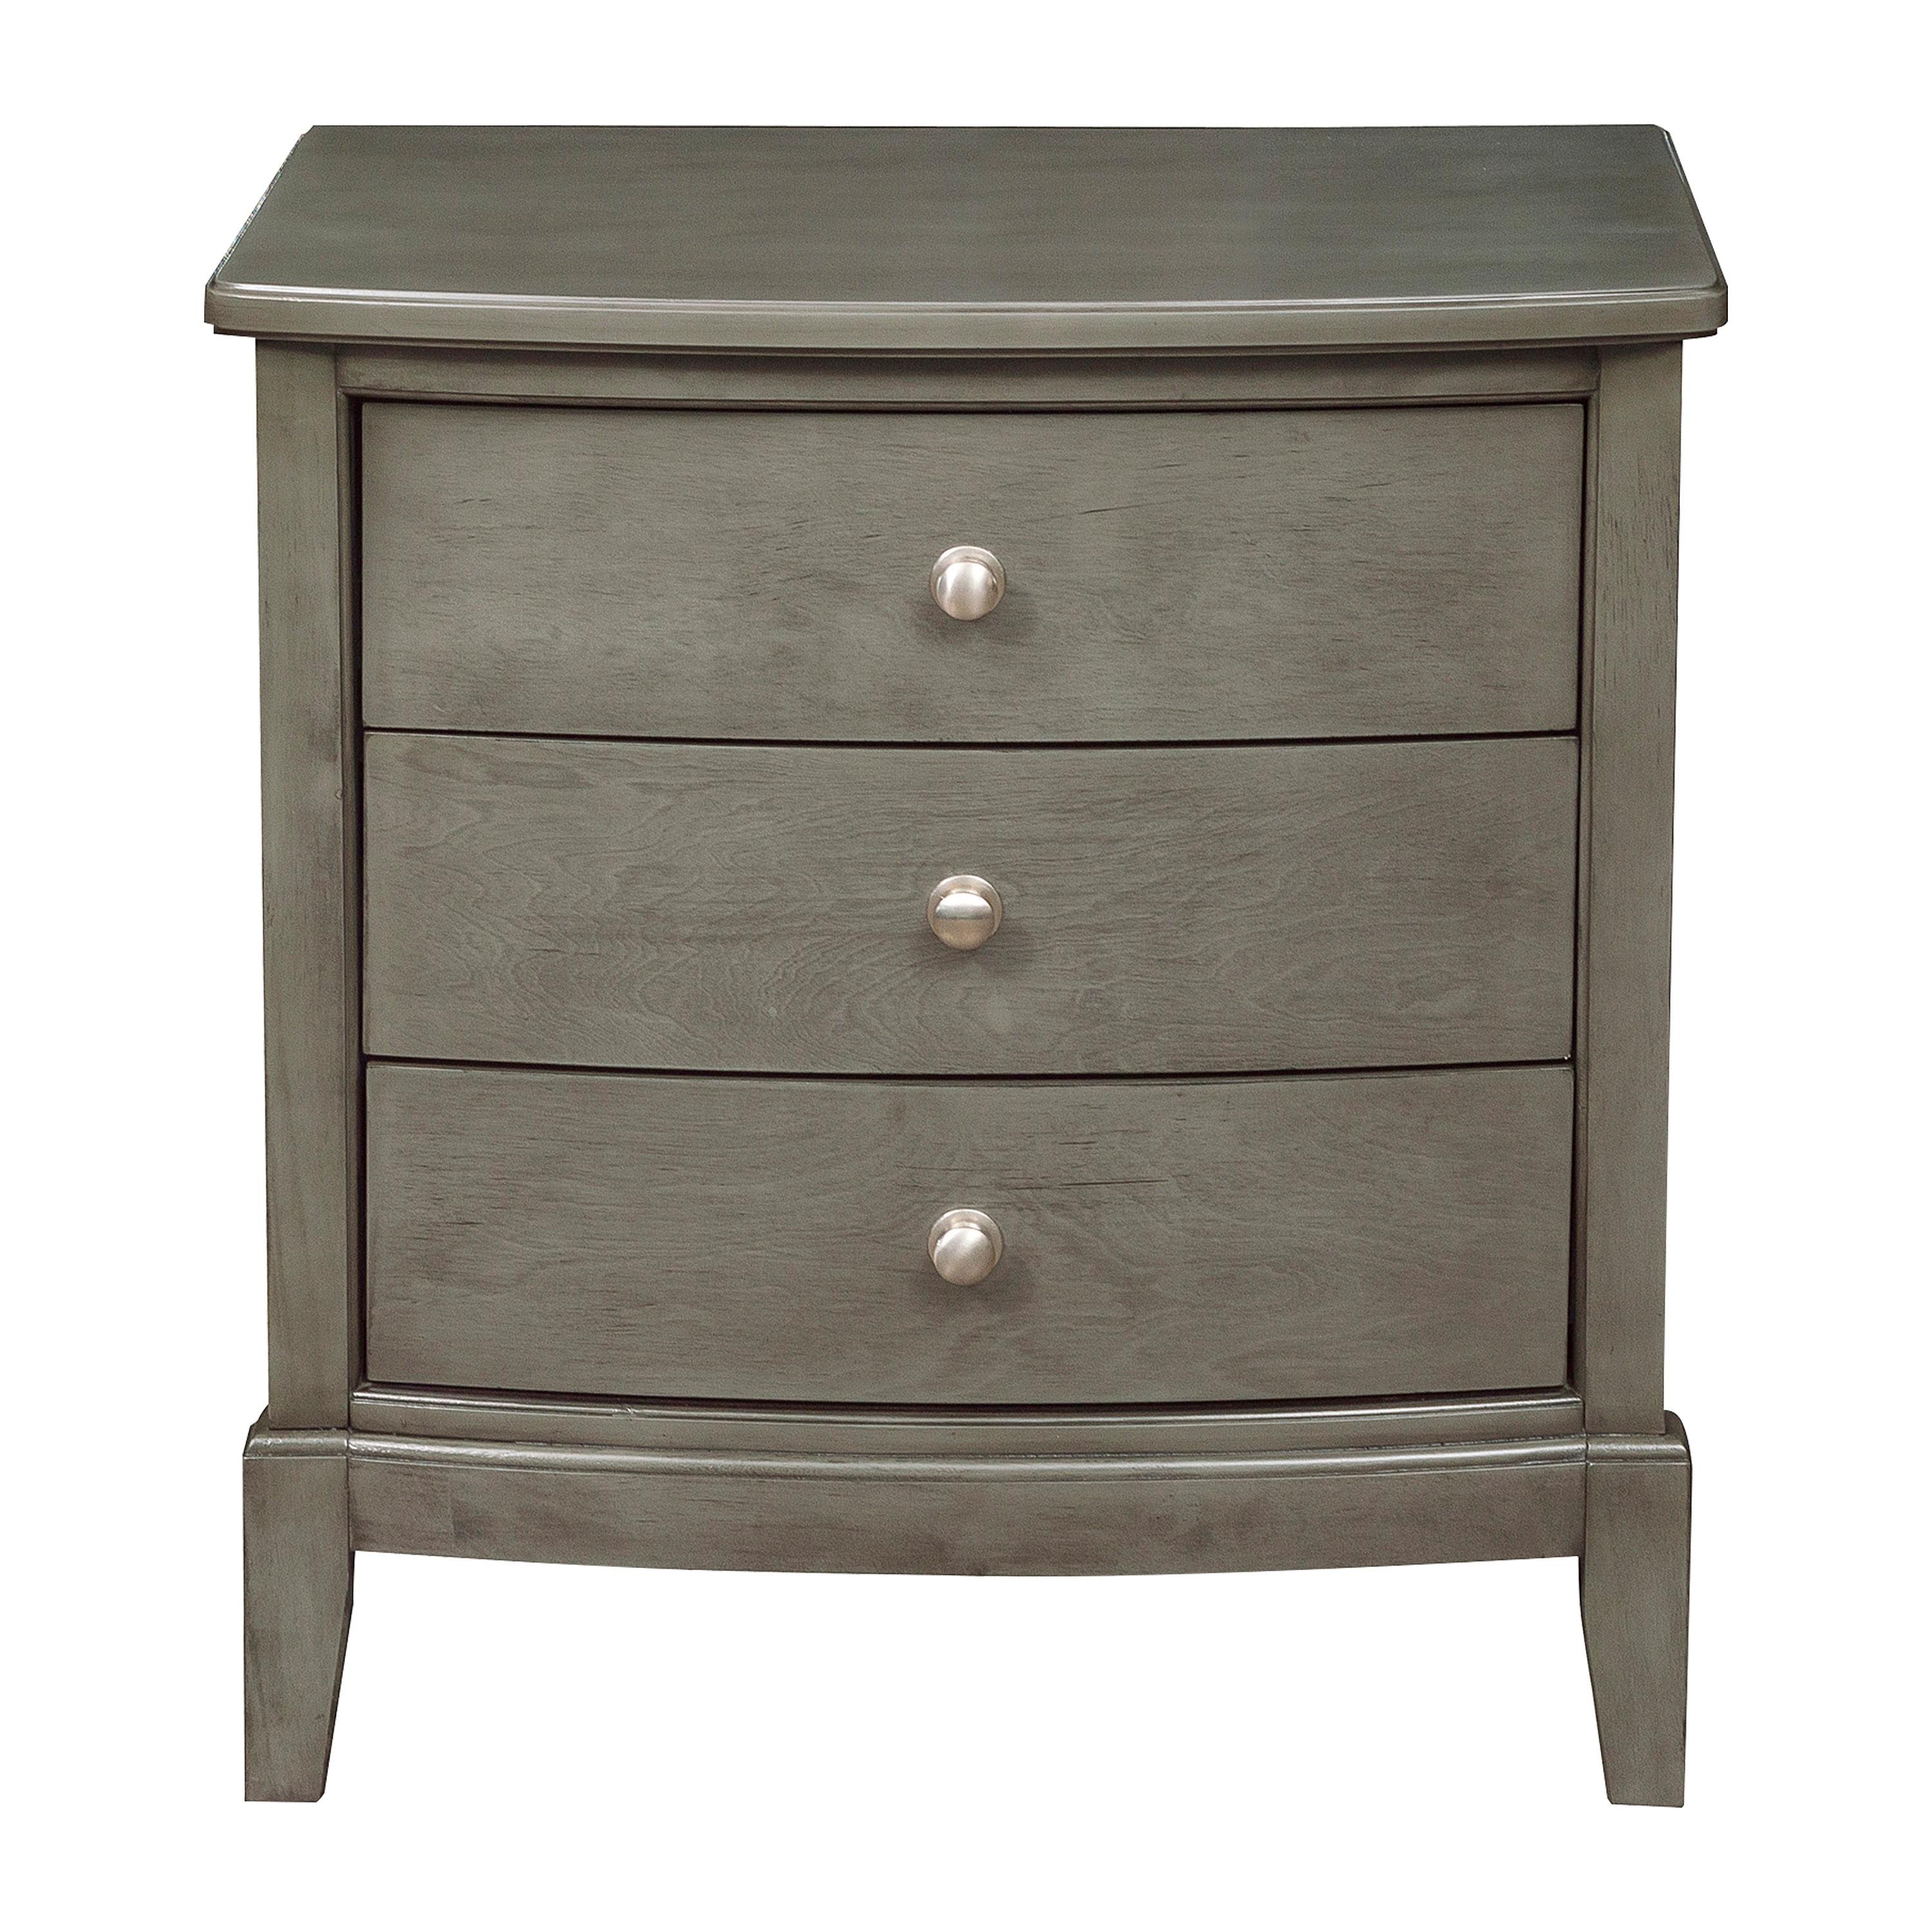 Transitional Nightstand 1730GY-4 Cotterill 1730GY-4 in Gray 